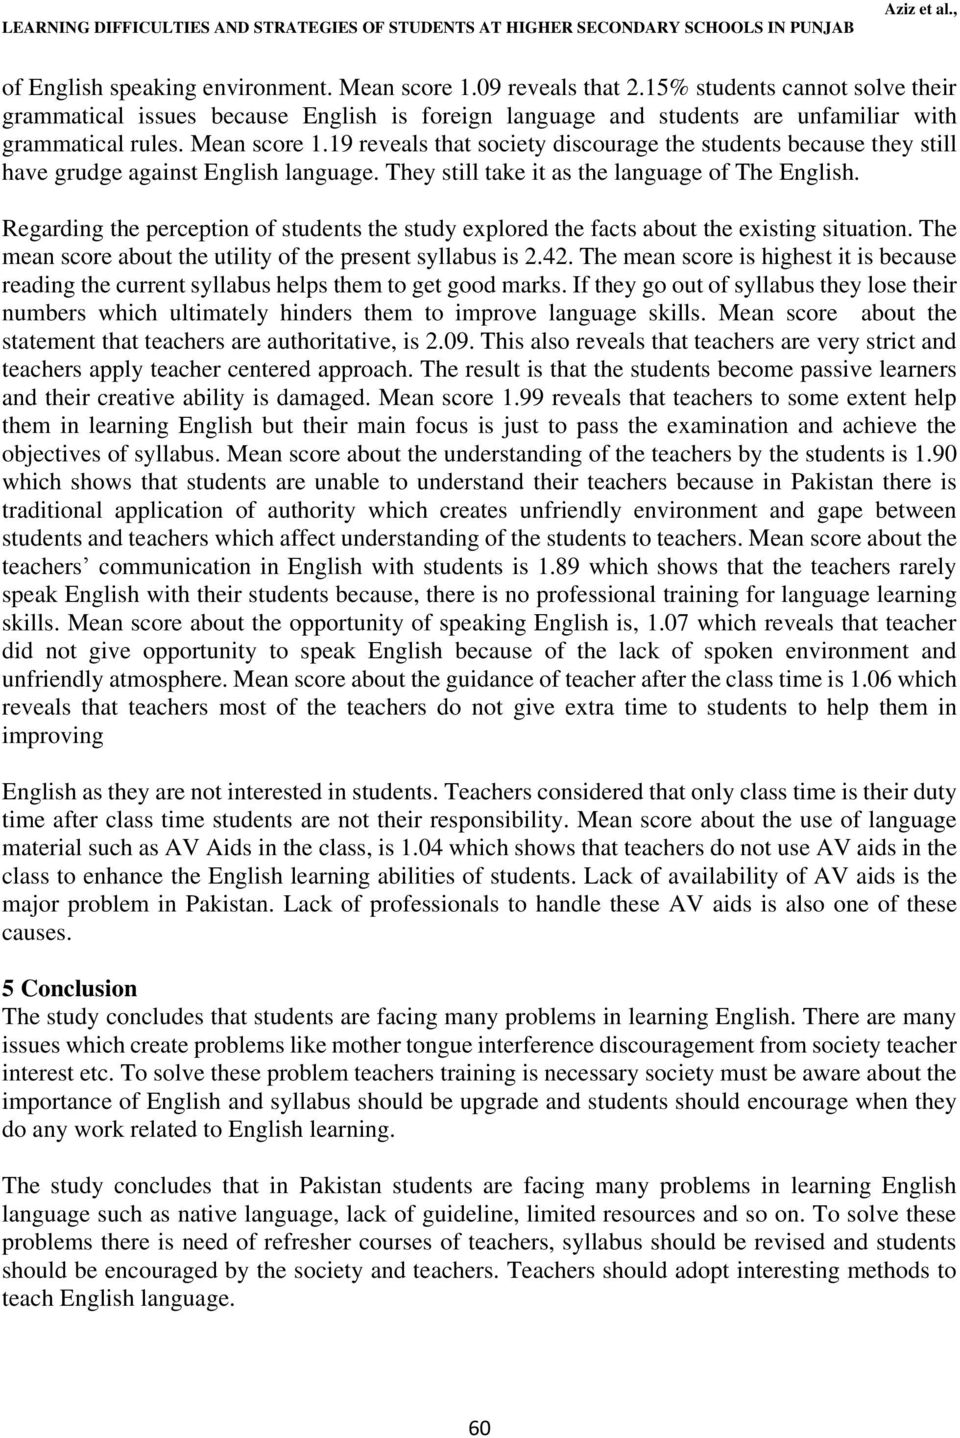 19 reveals that society discourage the students because they still have grudge against English language. They still take it as the language of The English.